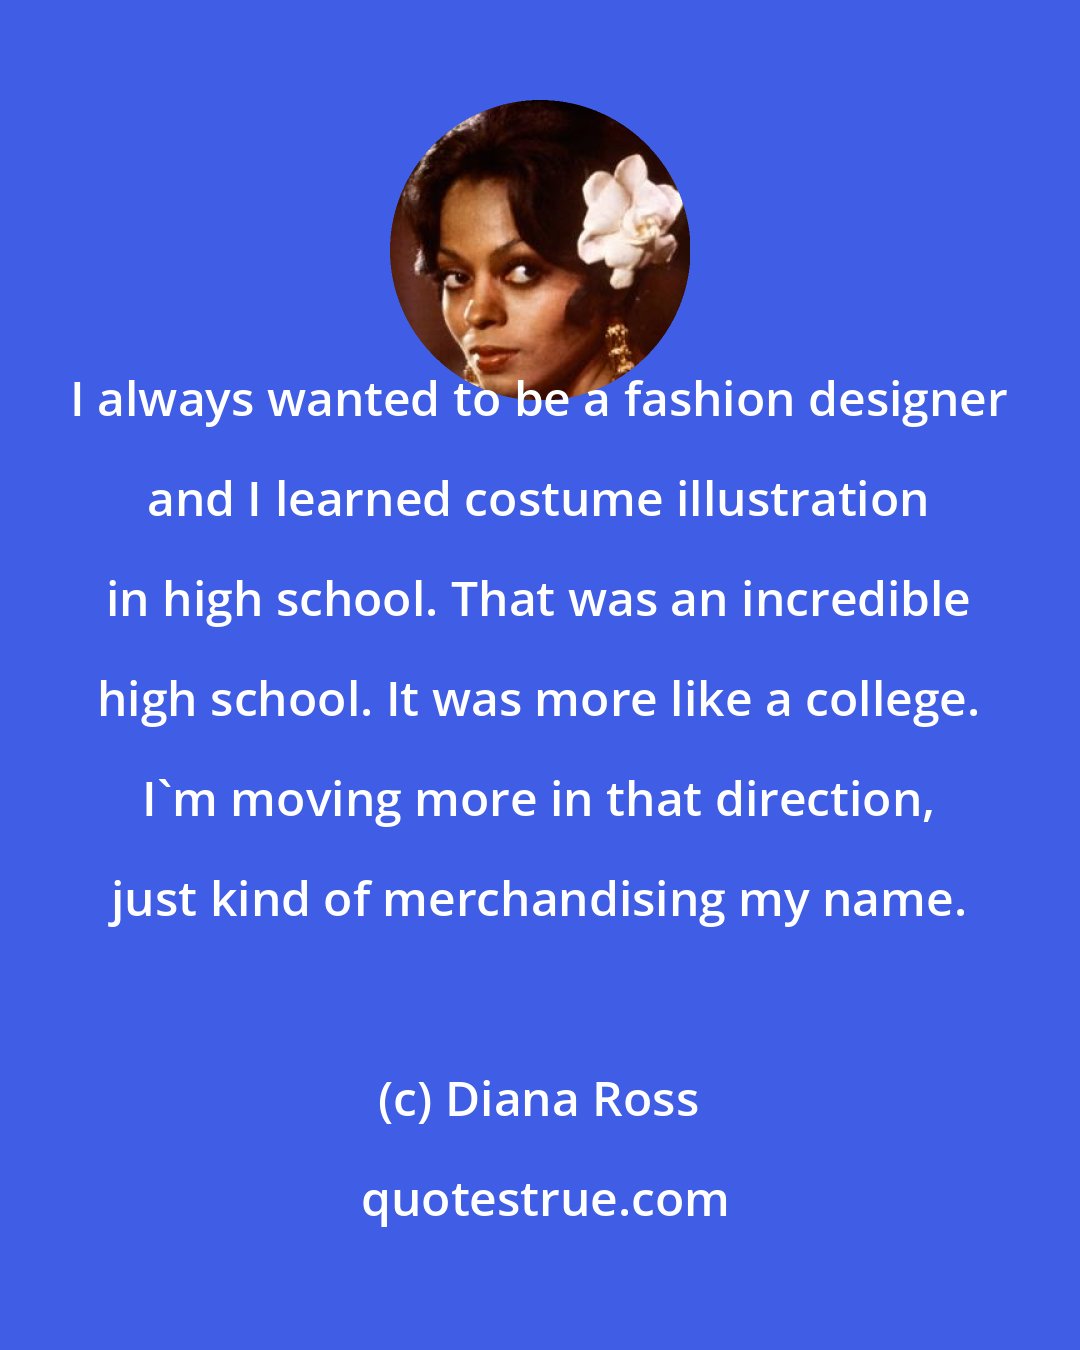 Diana Ross: I always wanted to be a fashion designer and I learned costume illustration in high school. That was an incredible high school. It was more like a college. I'm moving more in that direction, just kind of merchandising my name.